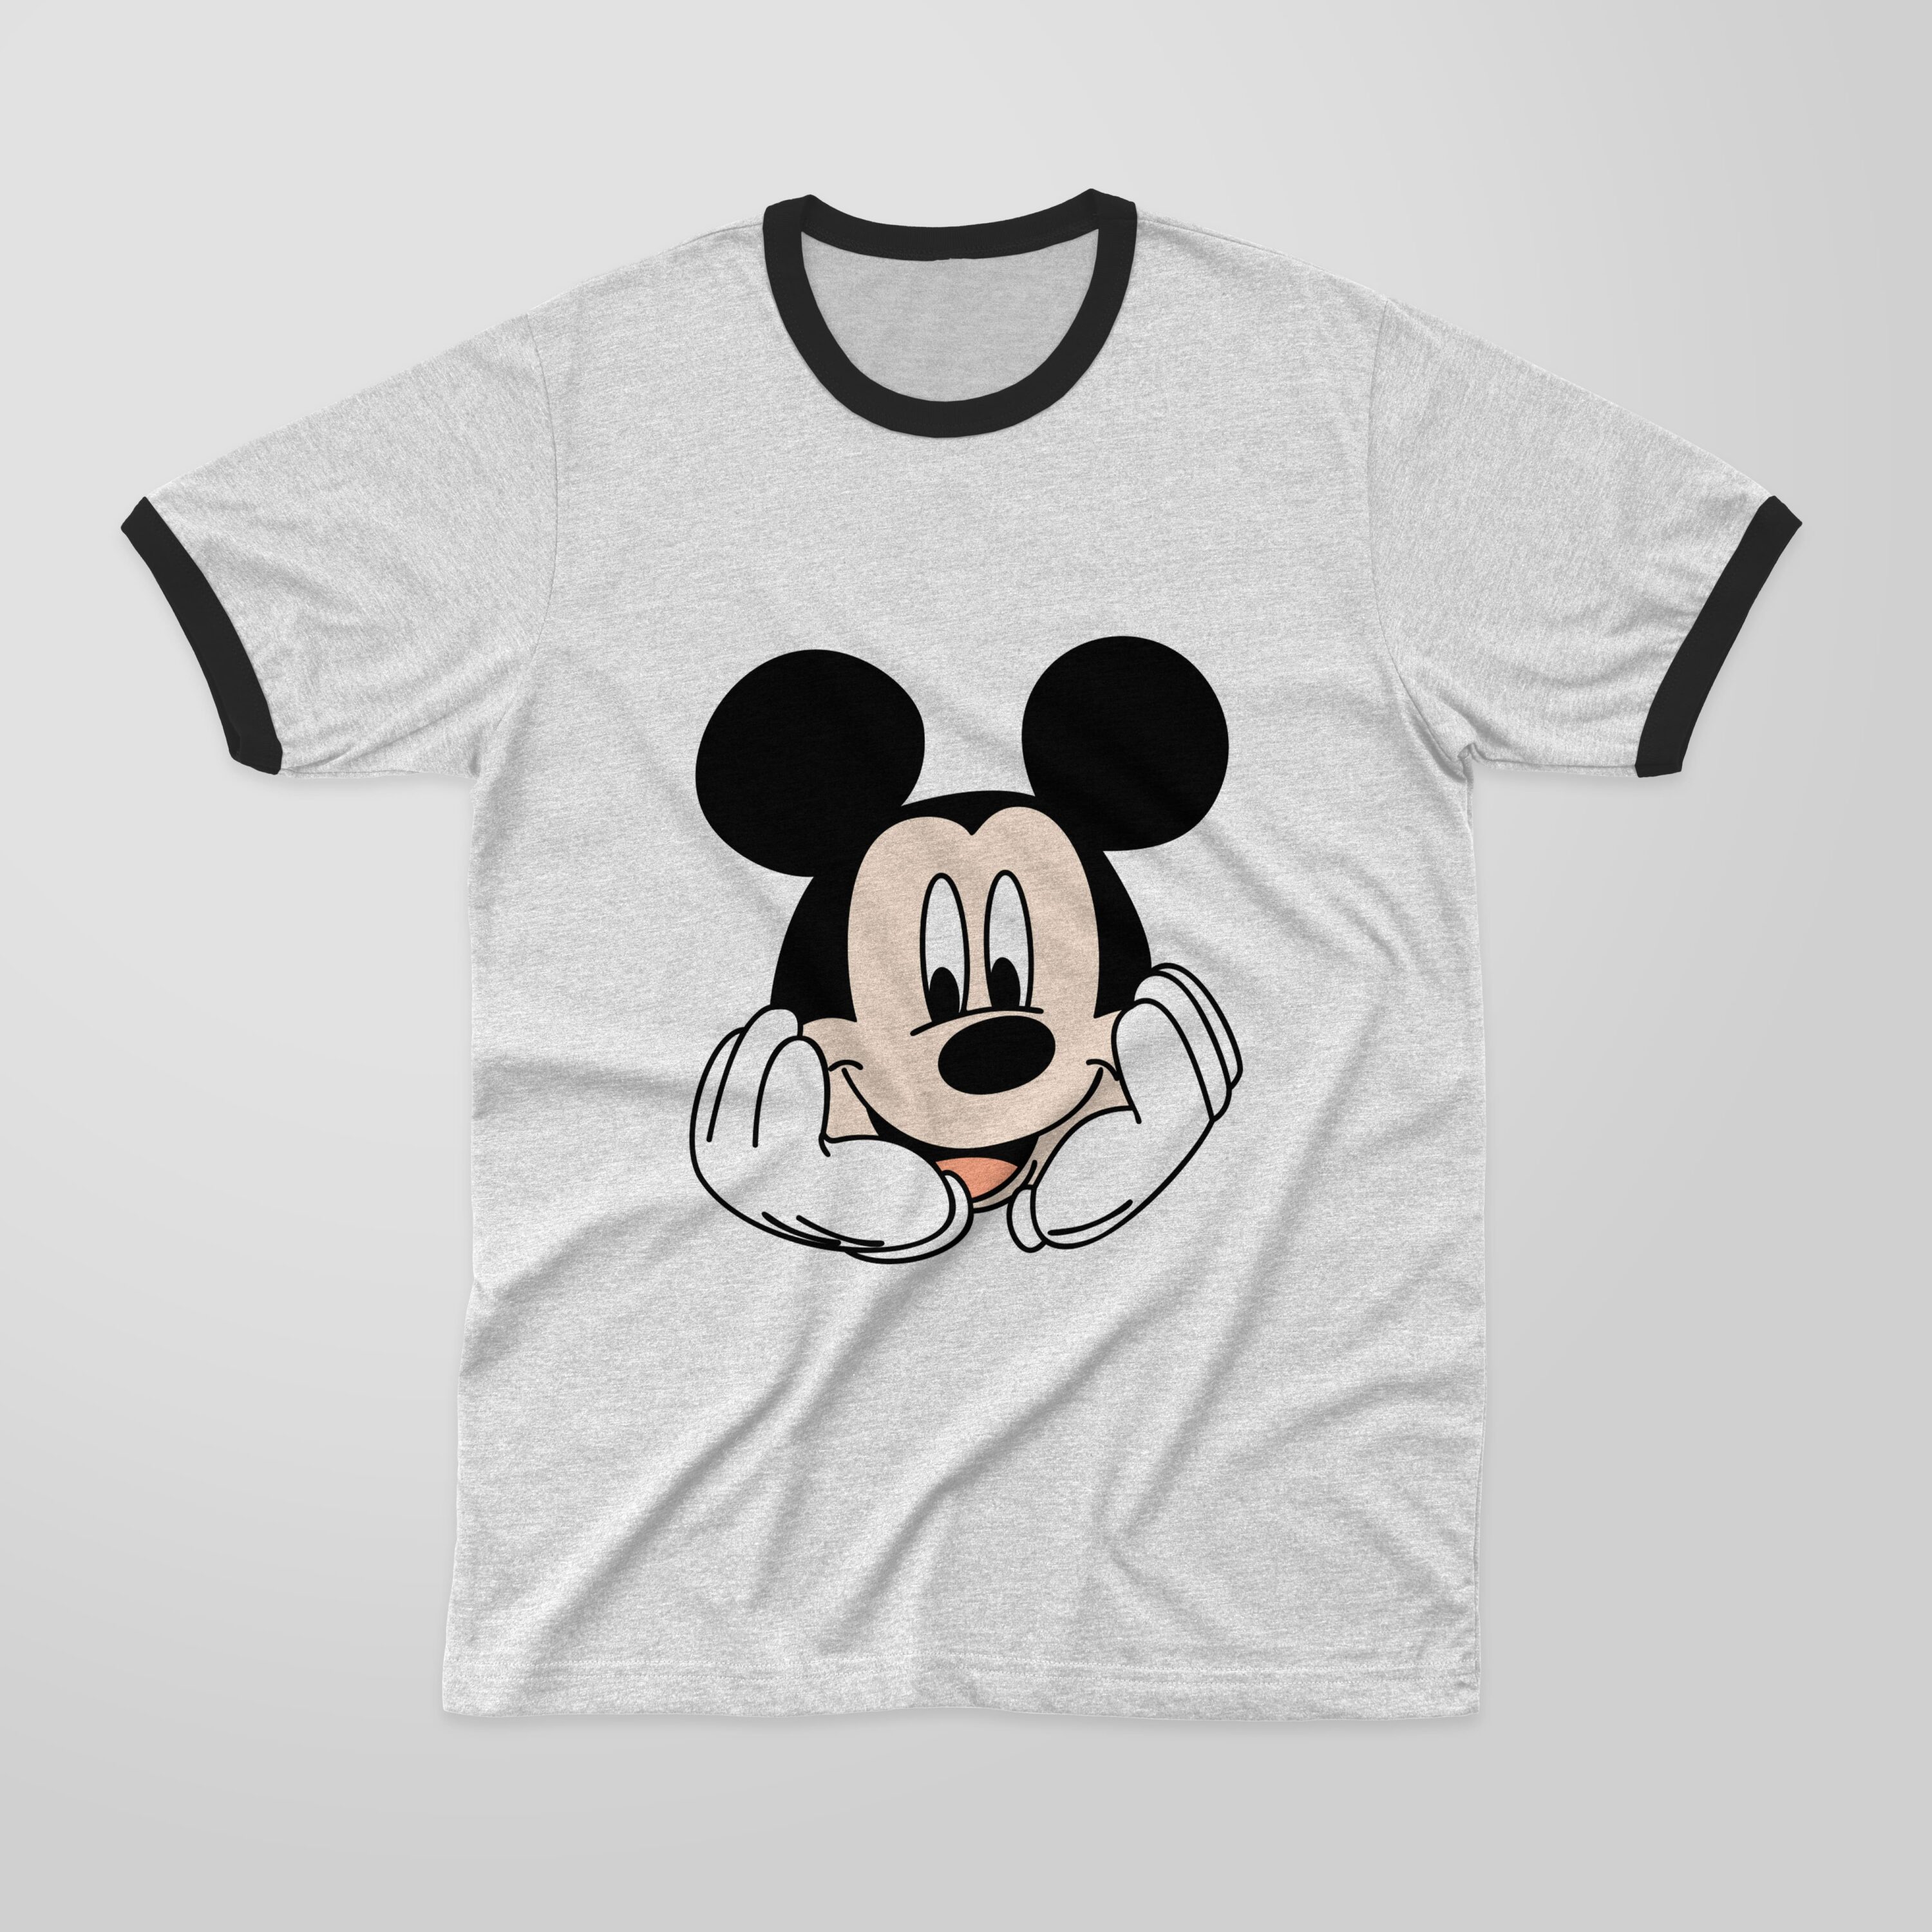 Disney mickey mouse for your t-shirt.